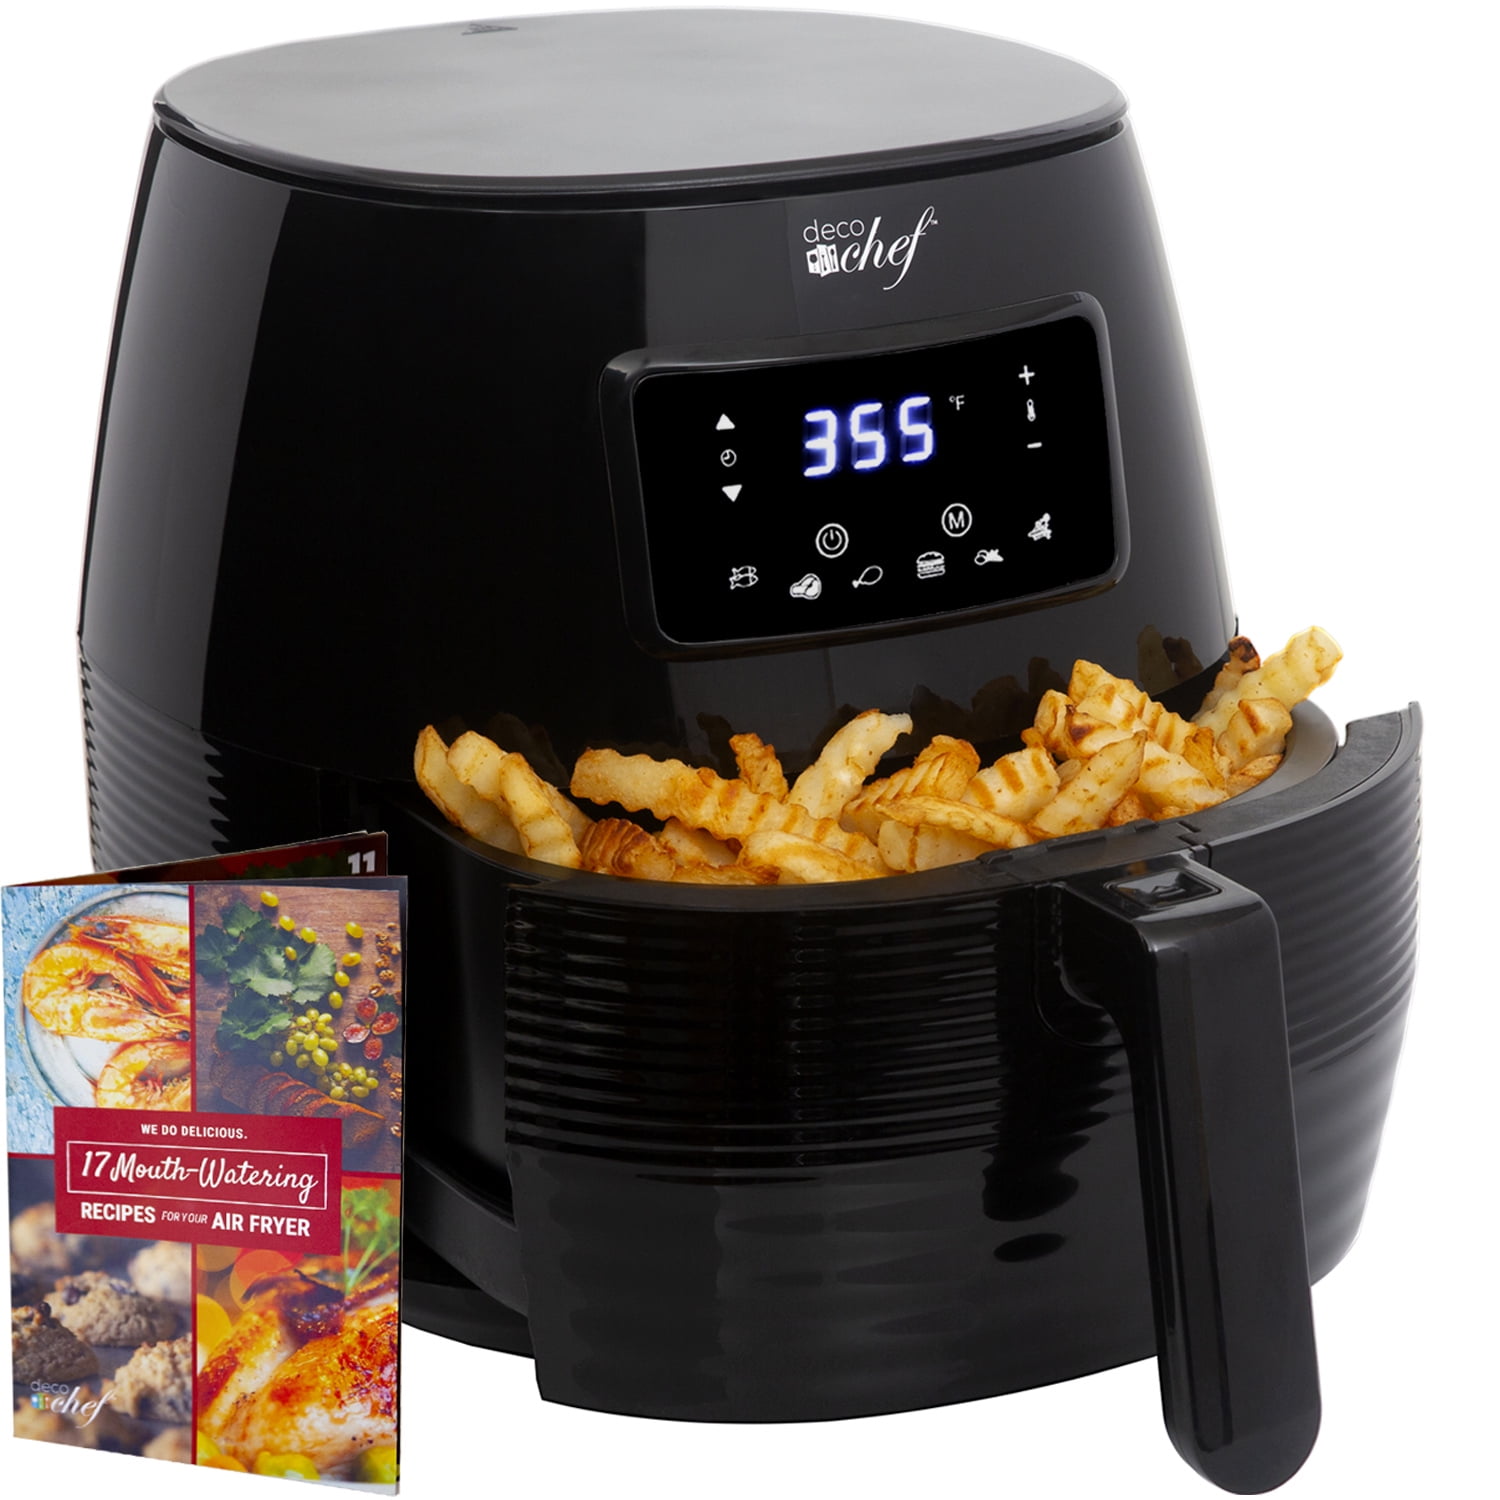 Air Fryer Oven 8.5qt, 410F Digital One Touch Screen Airfryer, Oil-Less Air Cooker That Crisps, Roasts, Reheats, Easy Meals, Nonstick and Dishwasher